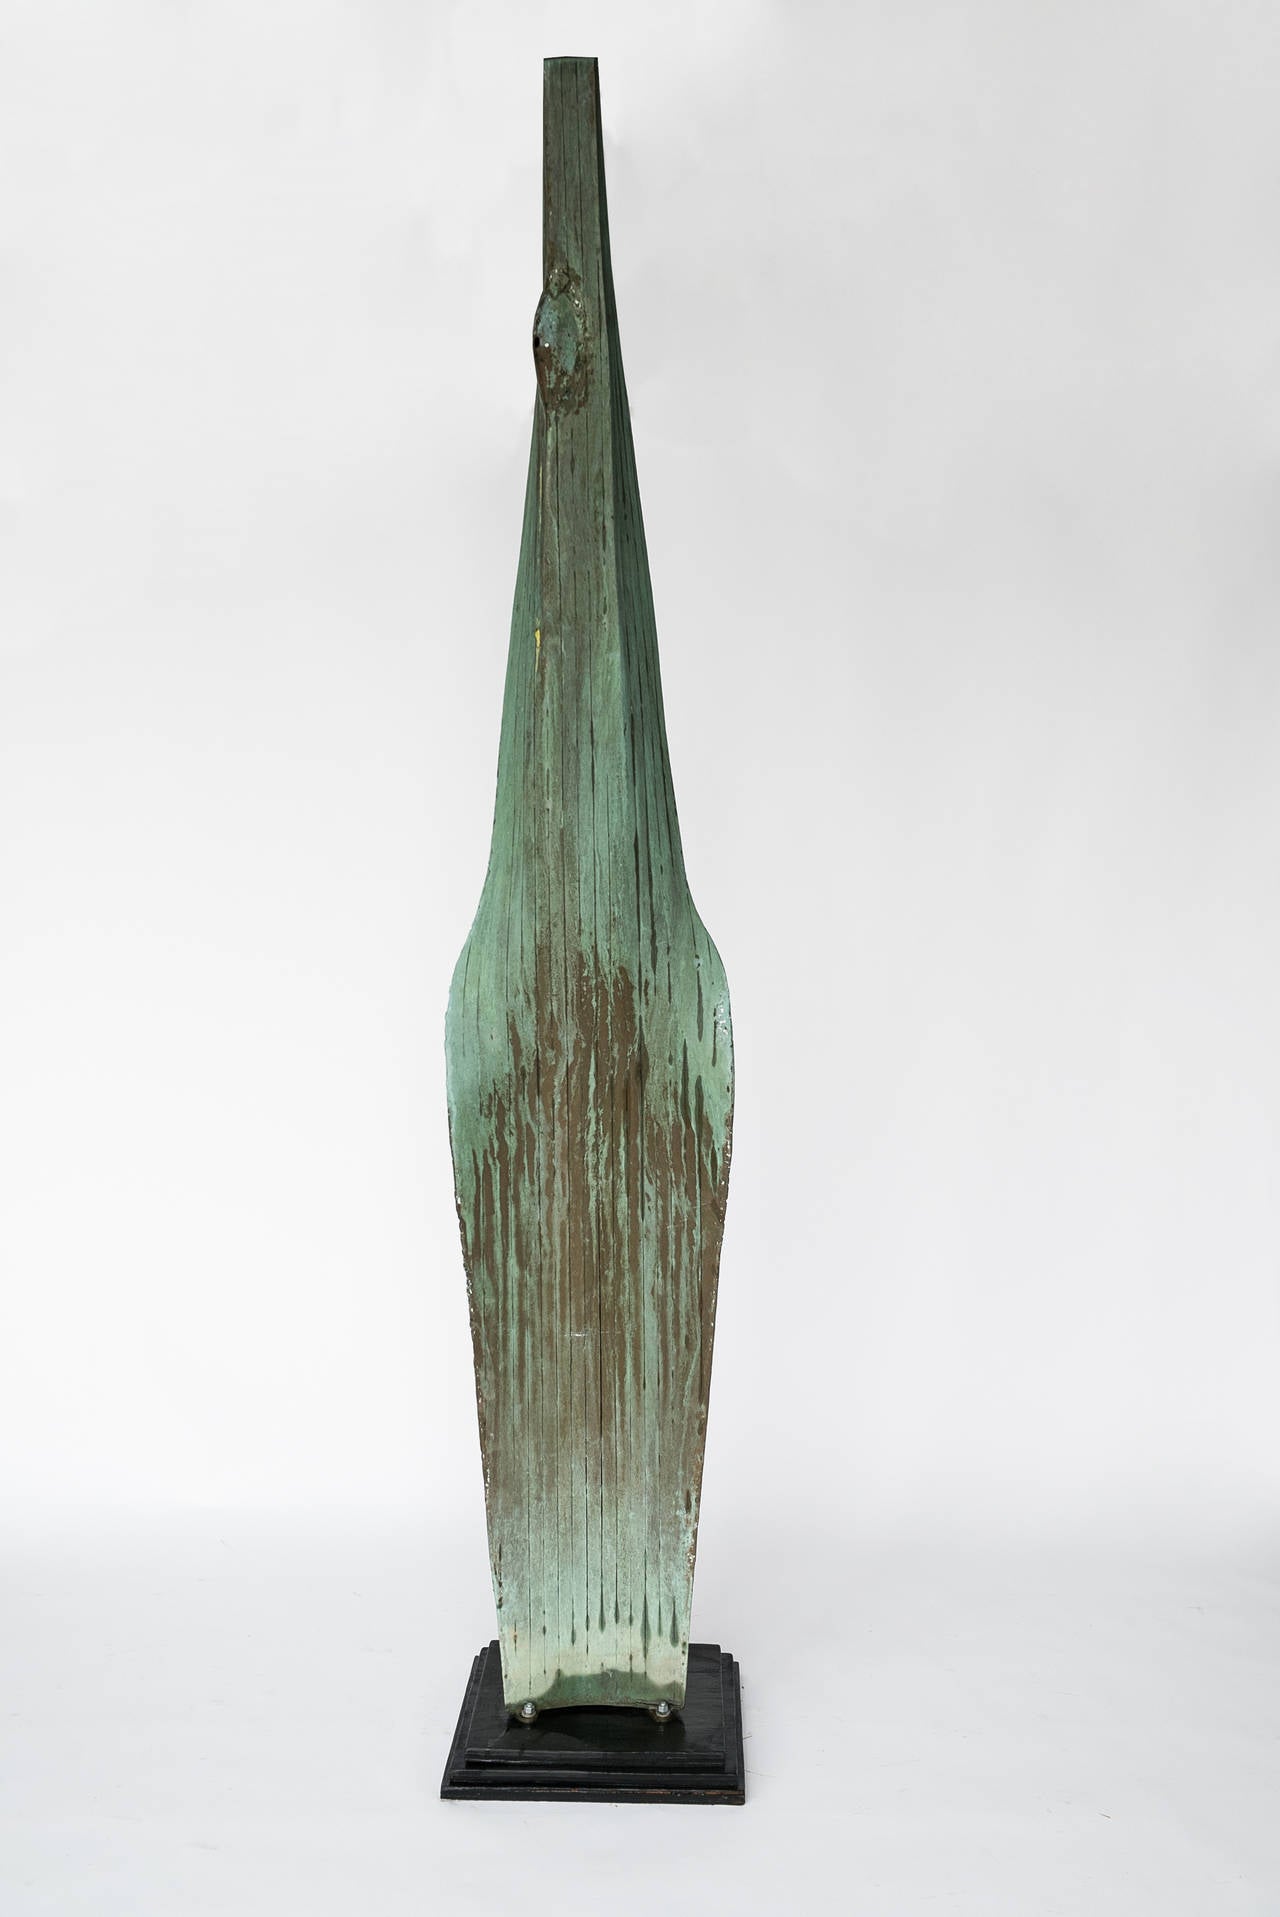 Raymond Granville Barger was a mid-century sculptor in Bucks County, PA, who worked with various materials including metal, plastelina, and bronze. His sculptures are works of art that dynamically enhance the architecture and landscape which